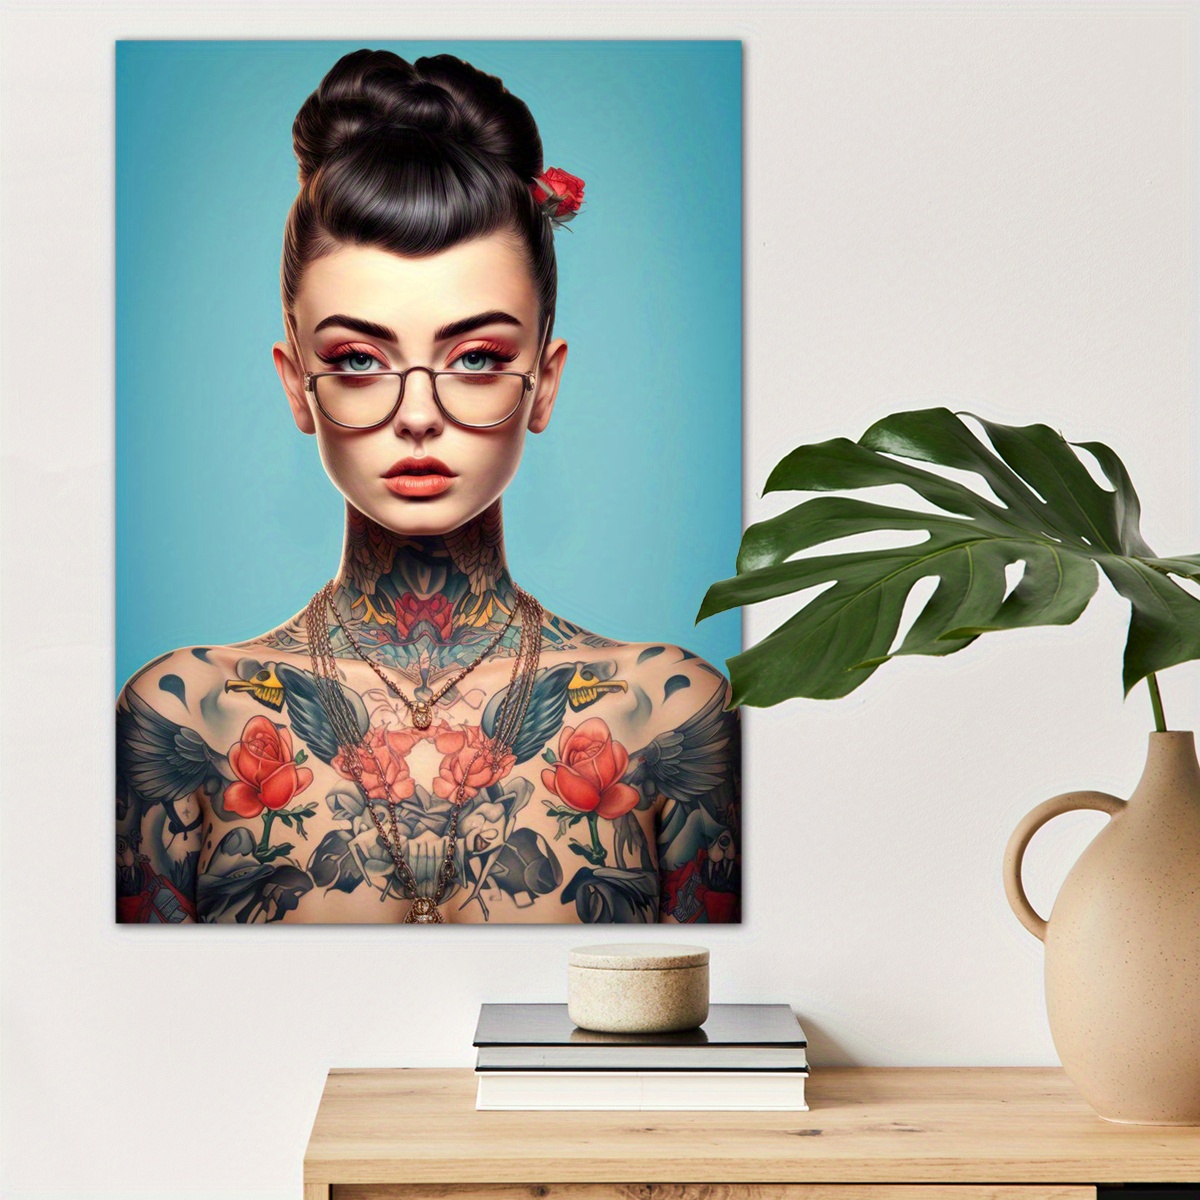 

1pc Tatoo Character With Glasses Canvas Wall Art For Home Decor, High Quality And Fans Wall Decor, Canvas Prints For Living Room Bedroom Bathroom Kitchen Office Cafe Decor, Perfect Gift And Decoration